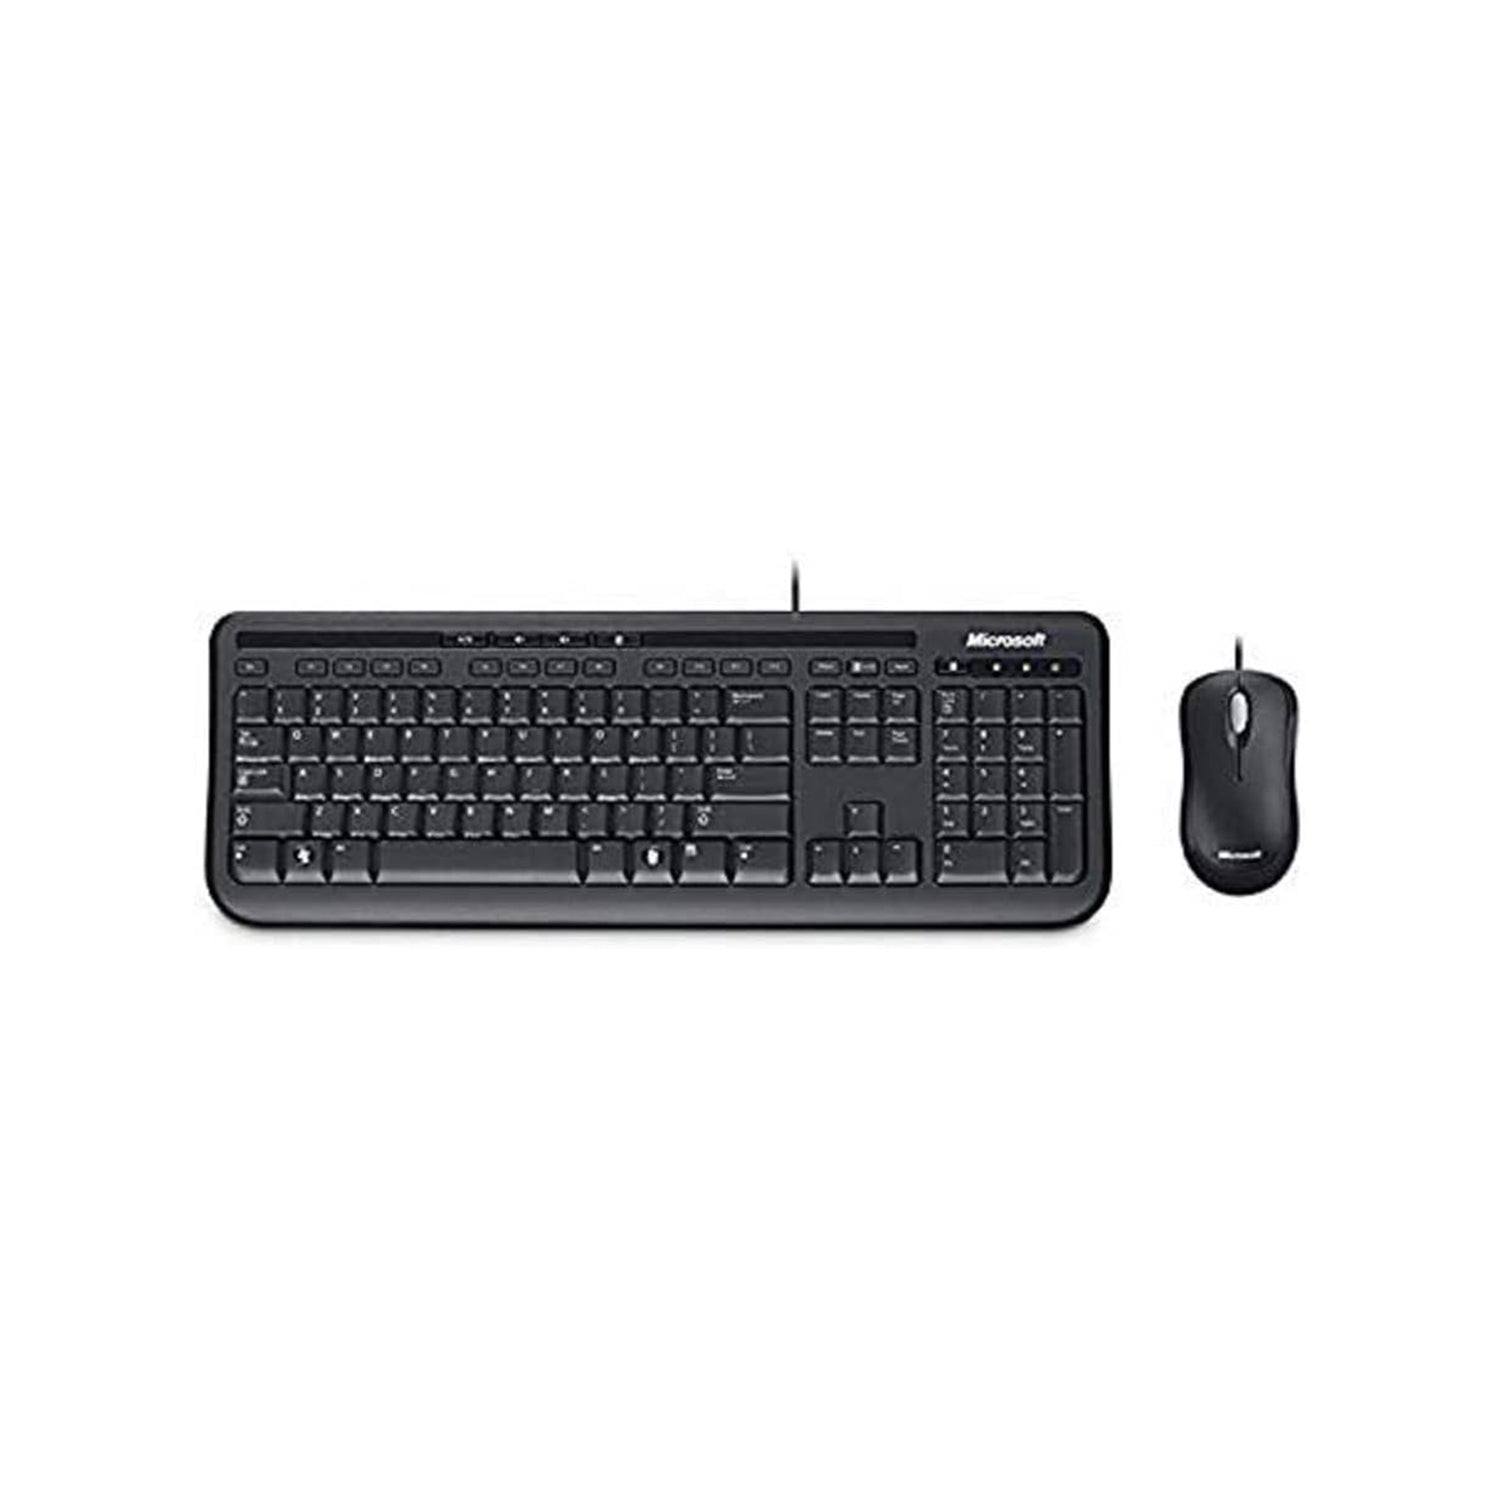 Microsoft Wired Desktop 600 Keyboard & Mouse combo - USB Cable - Optical Mouse - Compatible with Desktop Computer - PC, Windows (3J2-00022)